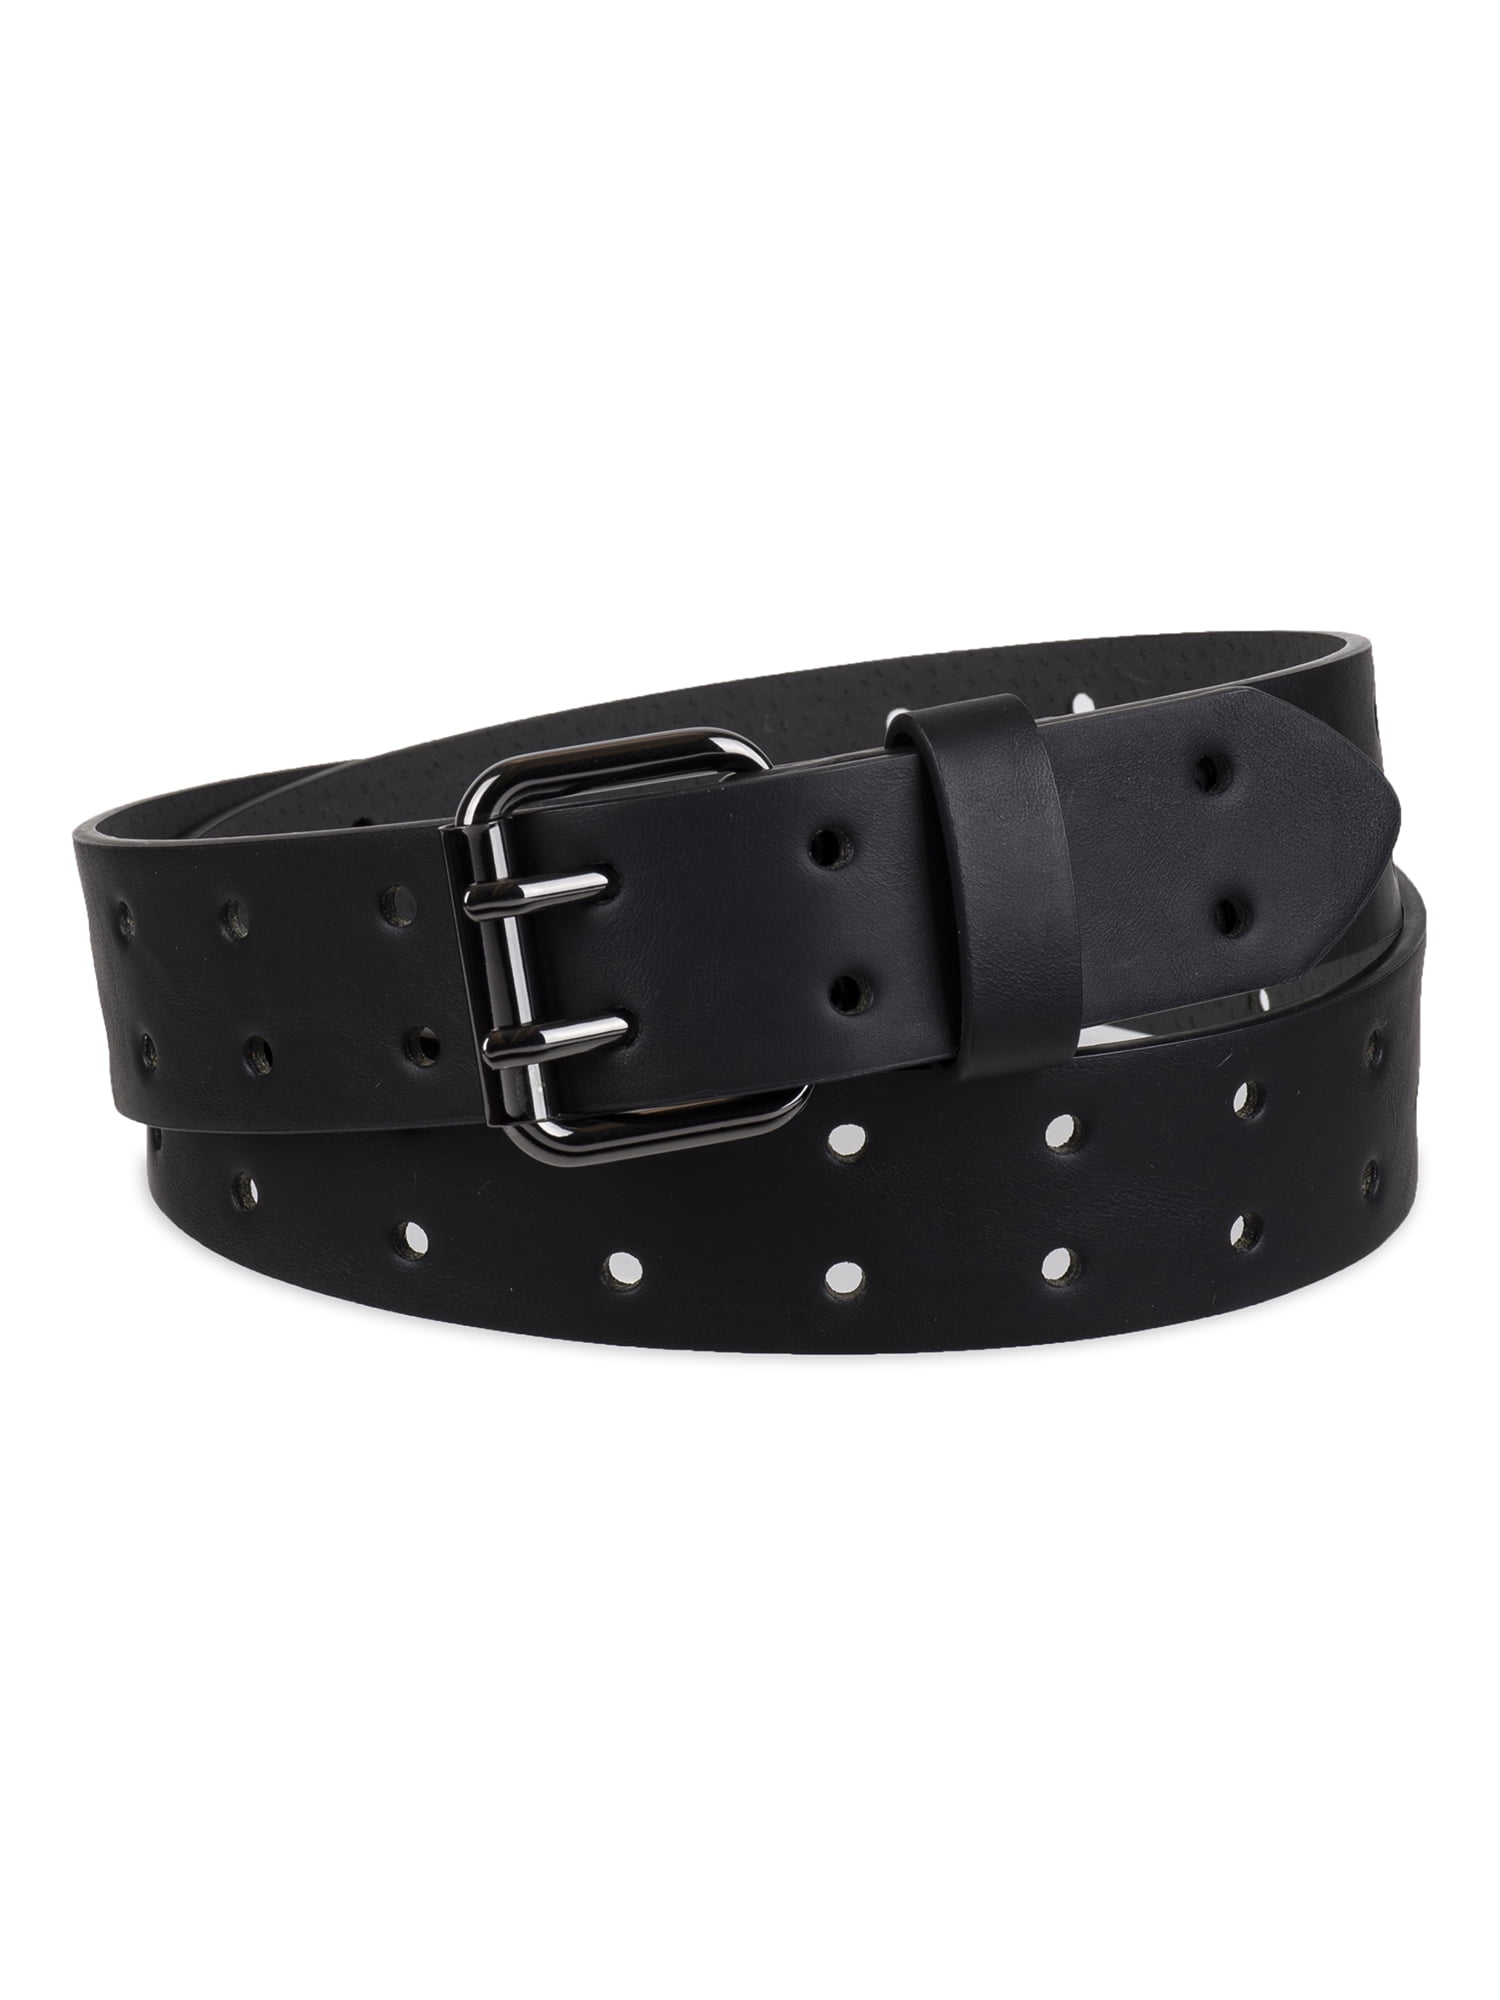 Genuine Dickies Women's Double Prong Perforated Casual Belt - Walmart.com